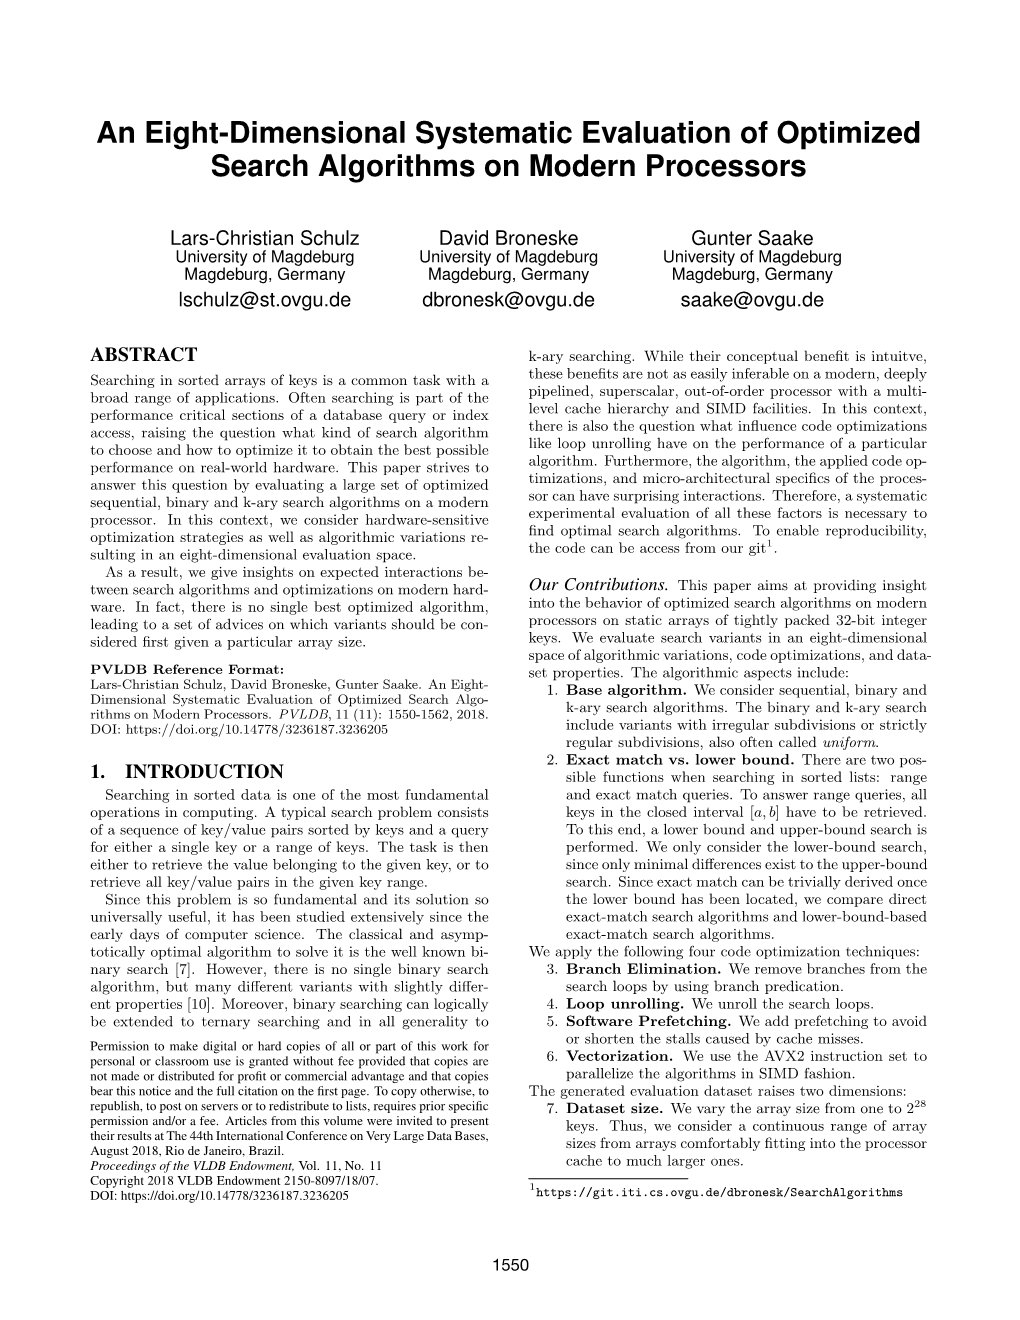 An Eight-Dimensional Systematic Evaluation of Optimized Search Algorithms on Modern Processors